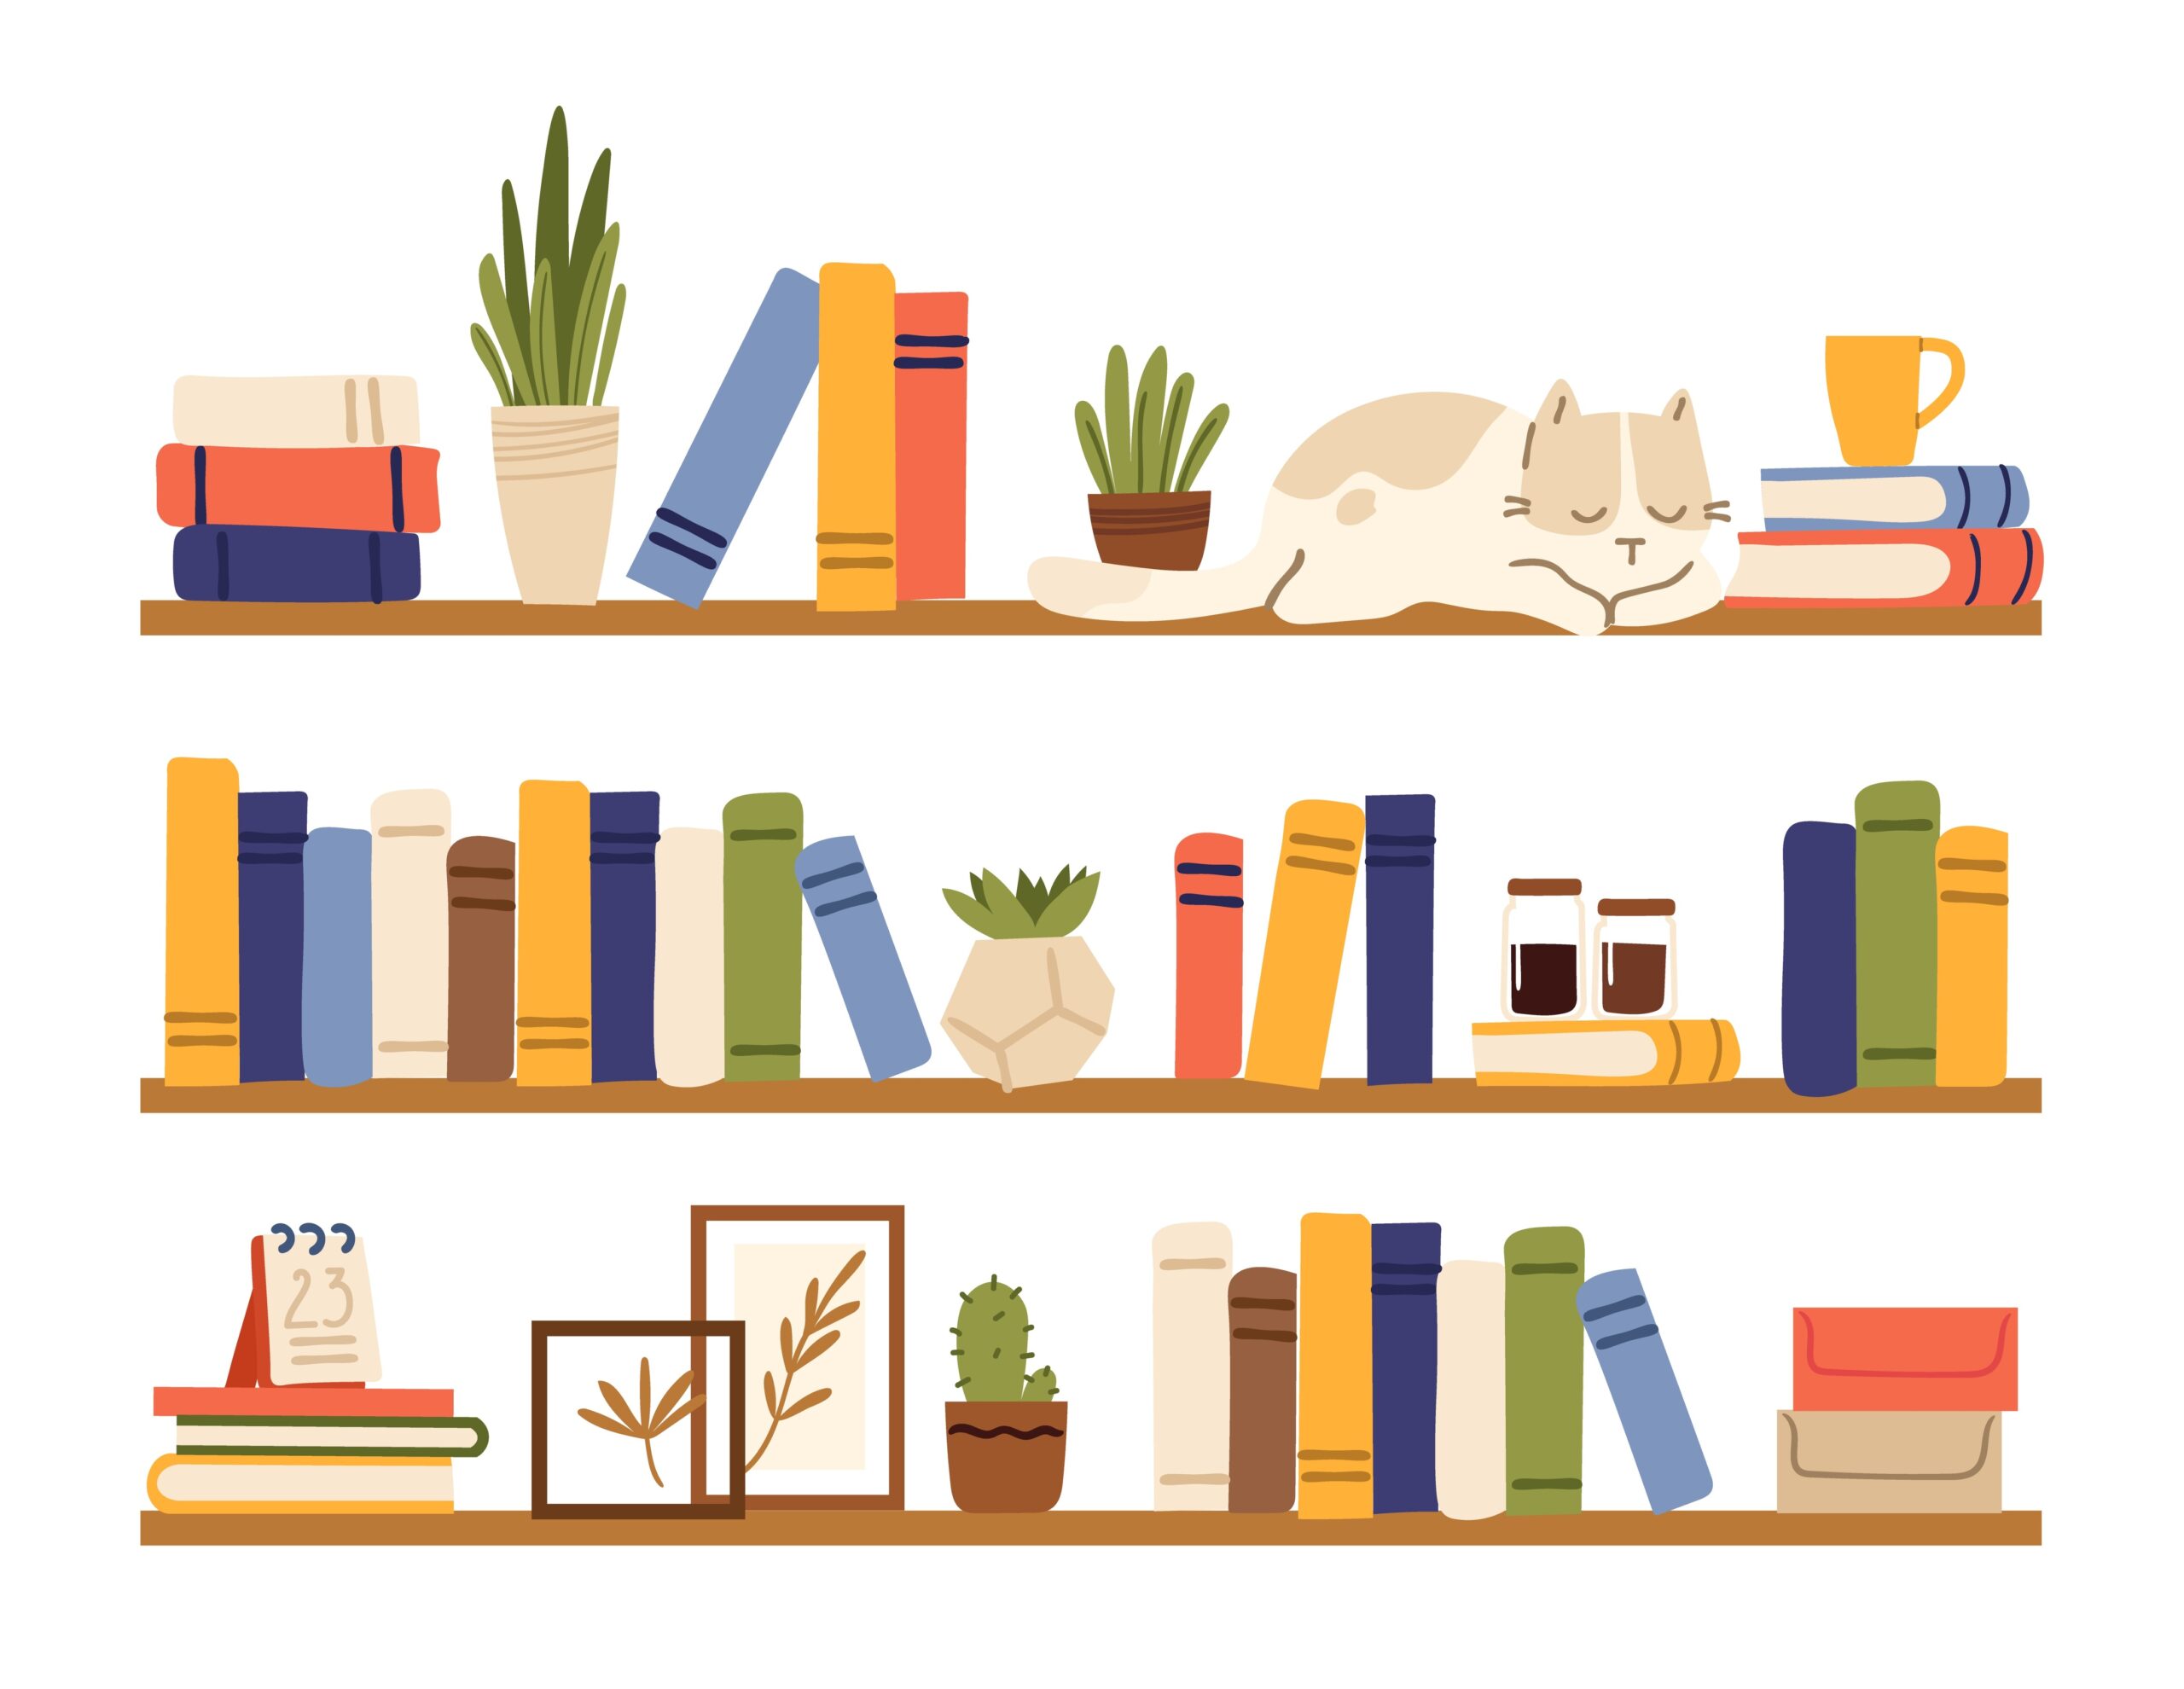 Book shelves. Rack books, interior bookshelf with cat, plants in pot and accessories. Isolated comfy scandinavian style home shelf, bookcase vector elements. Bookshelf wooden or rack with books